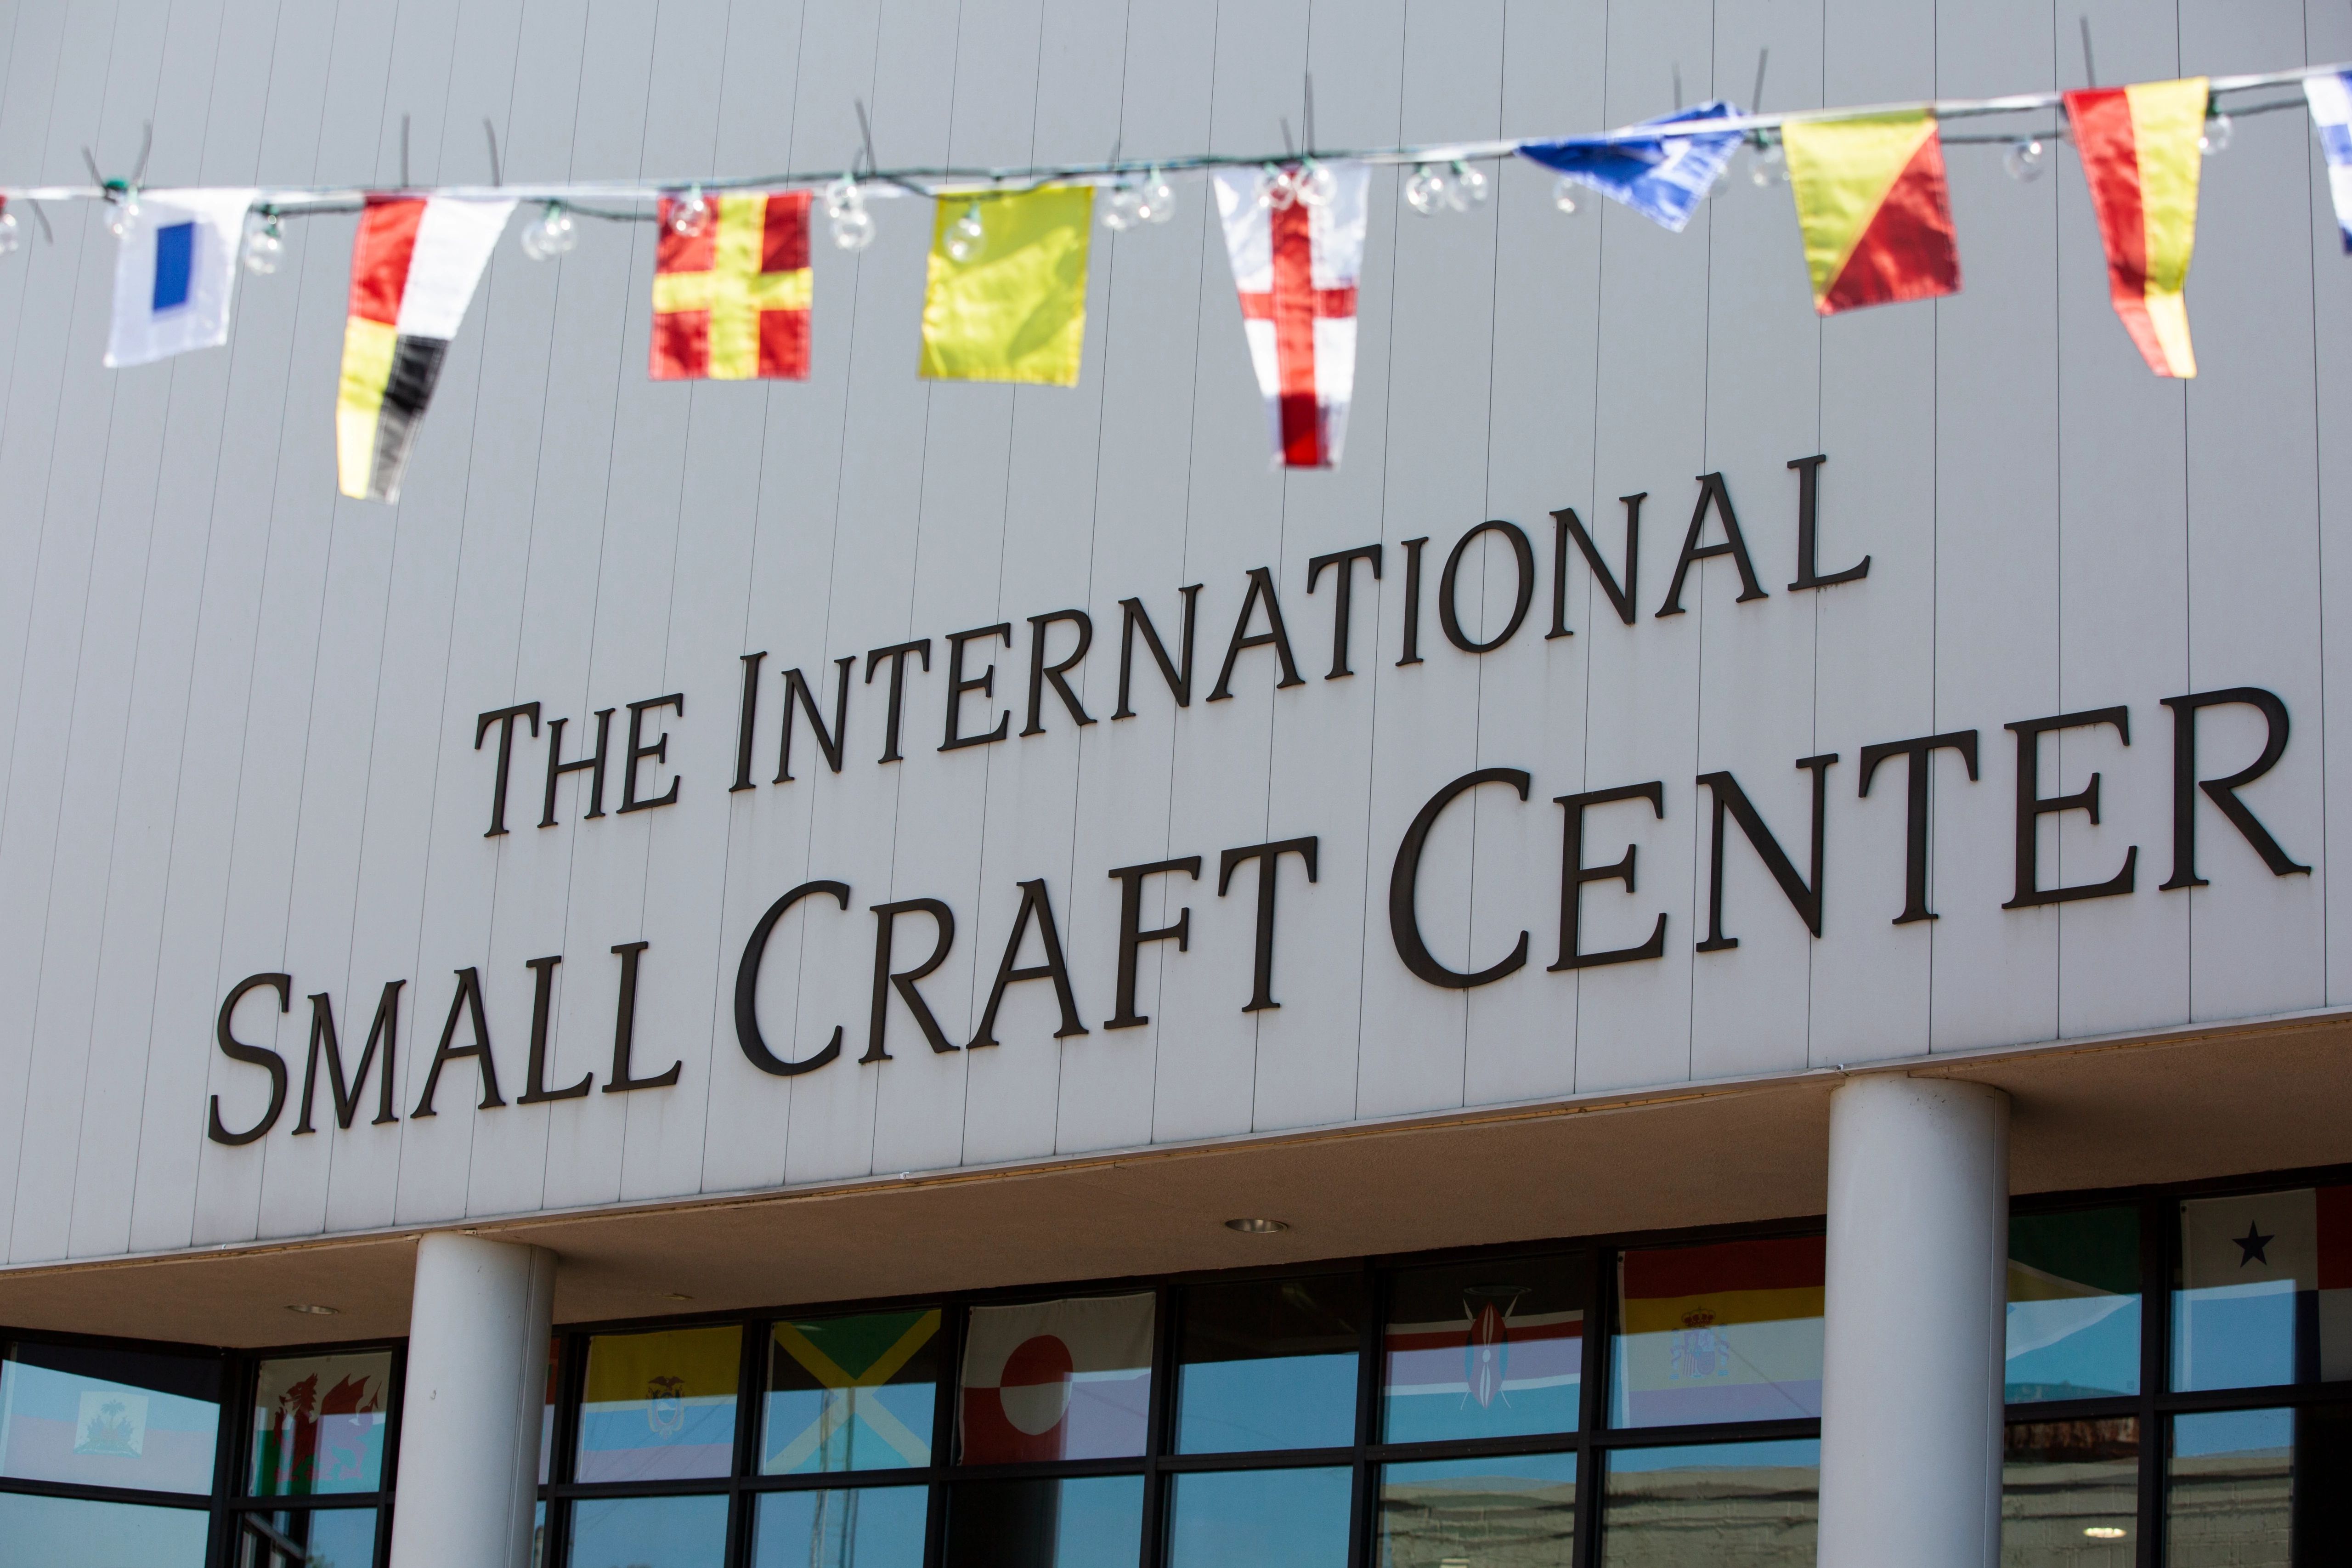 Entrance to the International Small Craft Center.